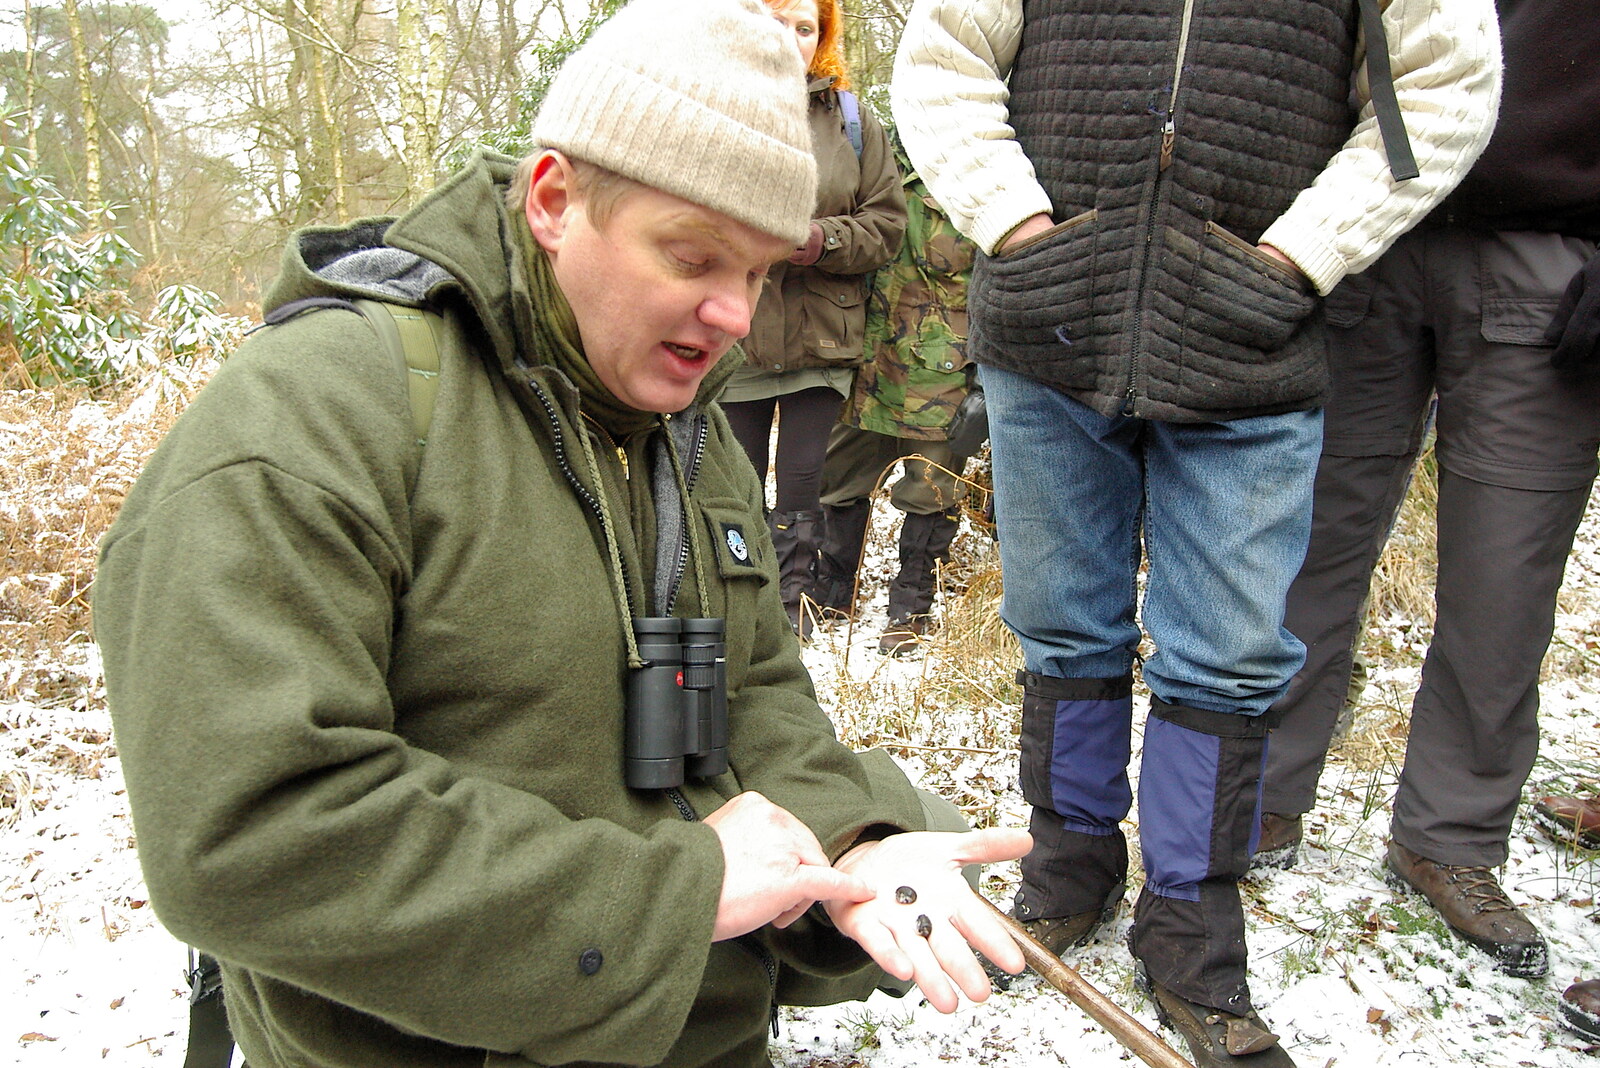 Ray explains the differences between deer droppings from Walk Like a Shadow: A Day With Ray Mears, Ashdown Forest, East Sussex - 29th December 2005